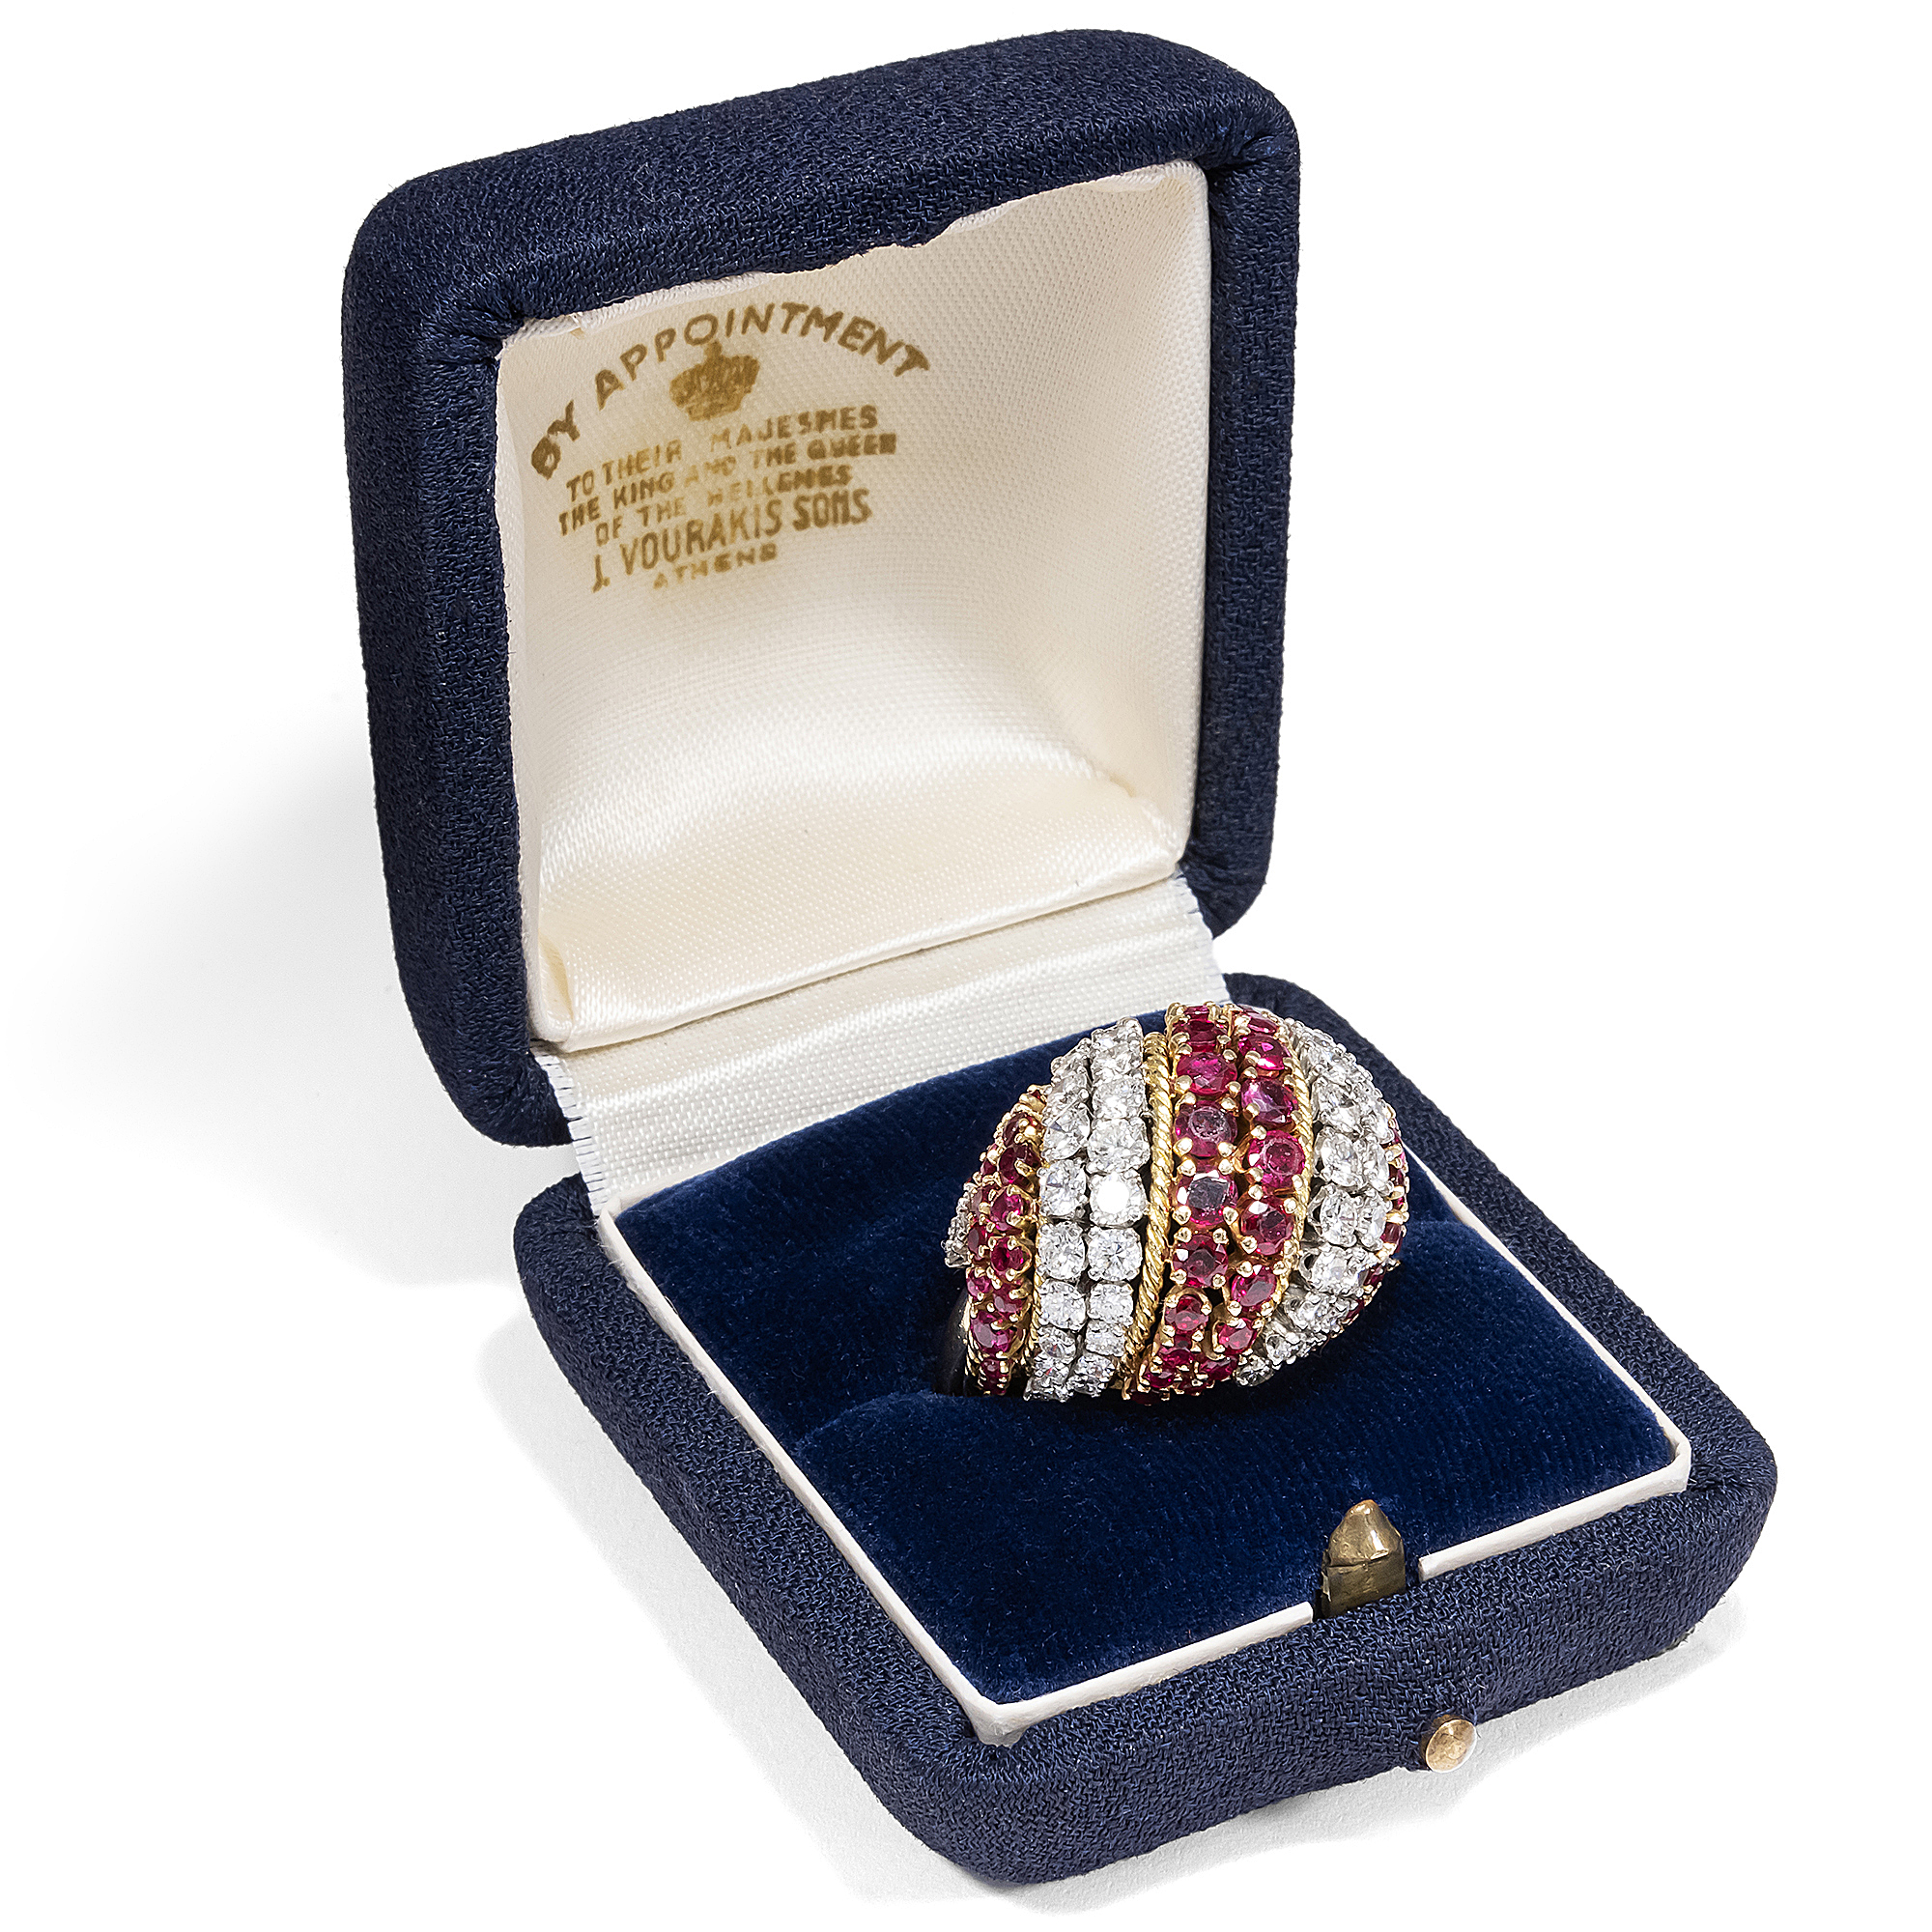 Spectacular Dome Ring With Rubies & Diamonds in Gold, Circa 1965